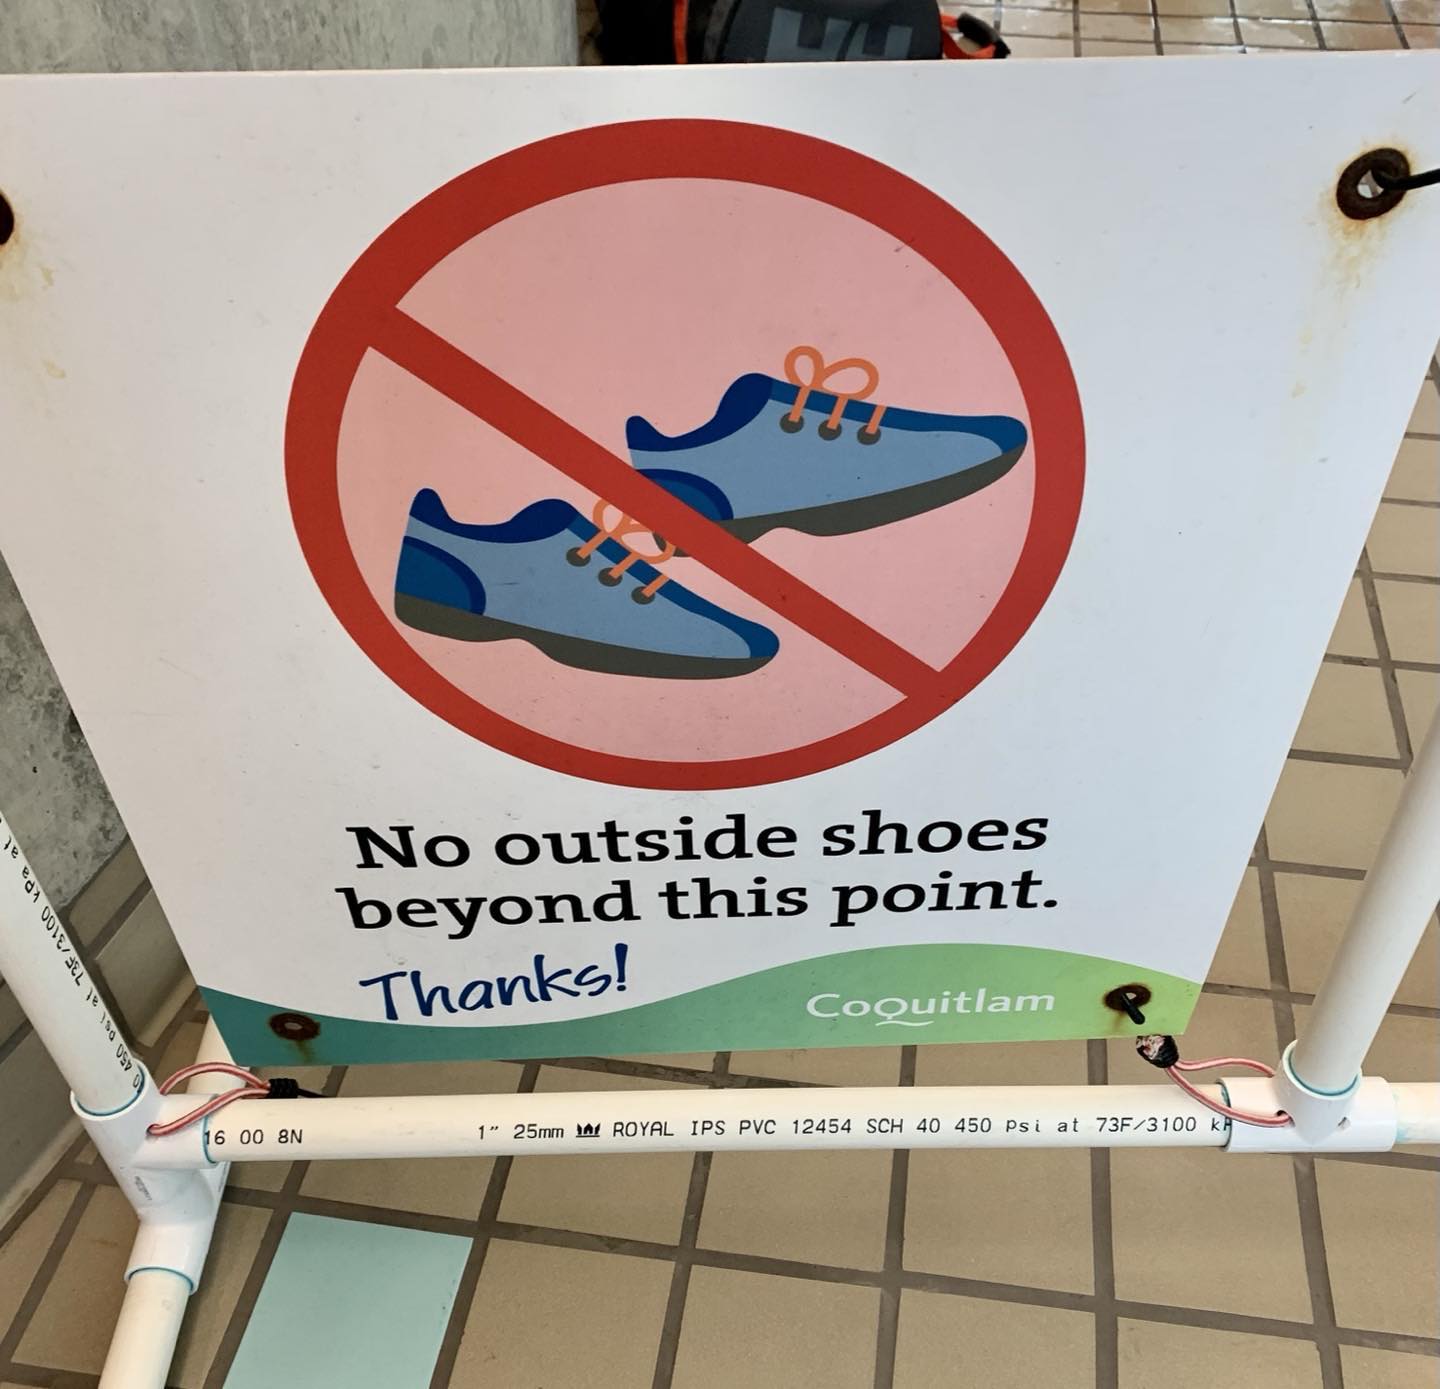 Sign at the pool says “no outside shoes beyond this point”.
95% of people at the pool this morning read it as saying “Look furtively around and then proceed on tiptoe in your boots as your boots drop clumps of mud on the pool deck where little children are walking barefoot.”